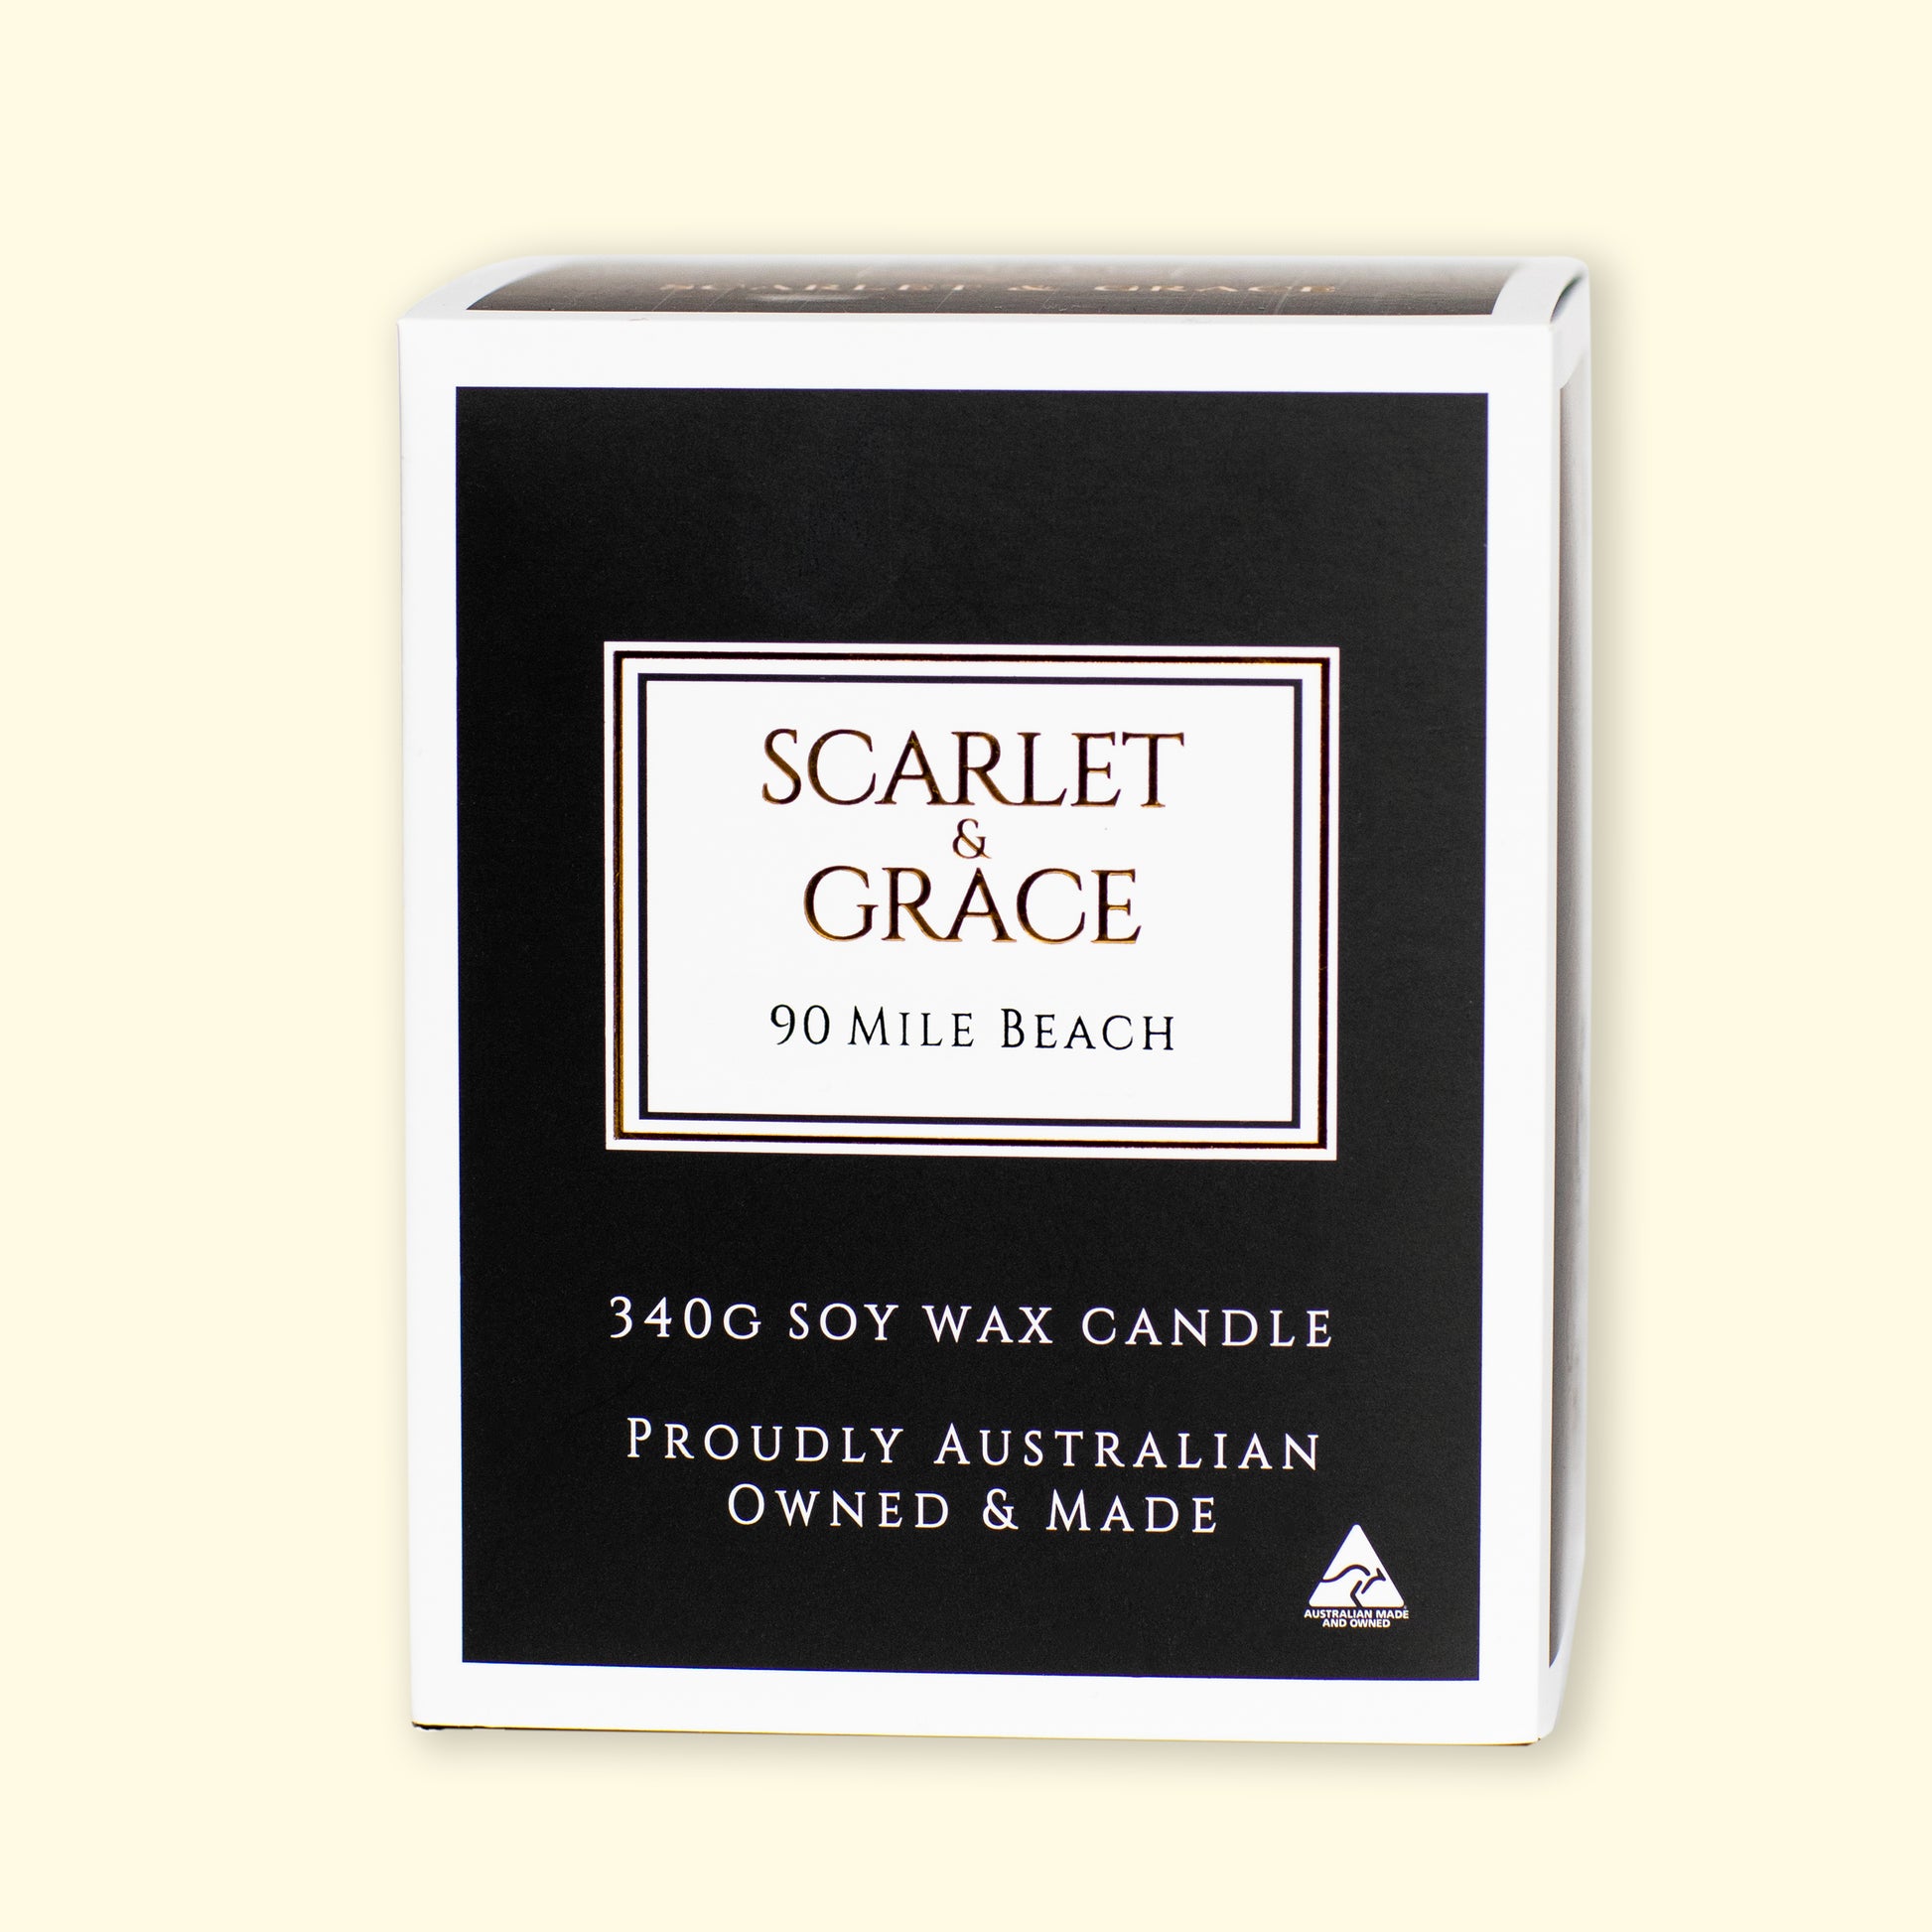 90 Mile Beach - 340gm Soy Wax Candle - Scarlet & Grace